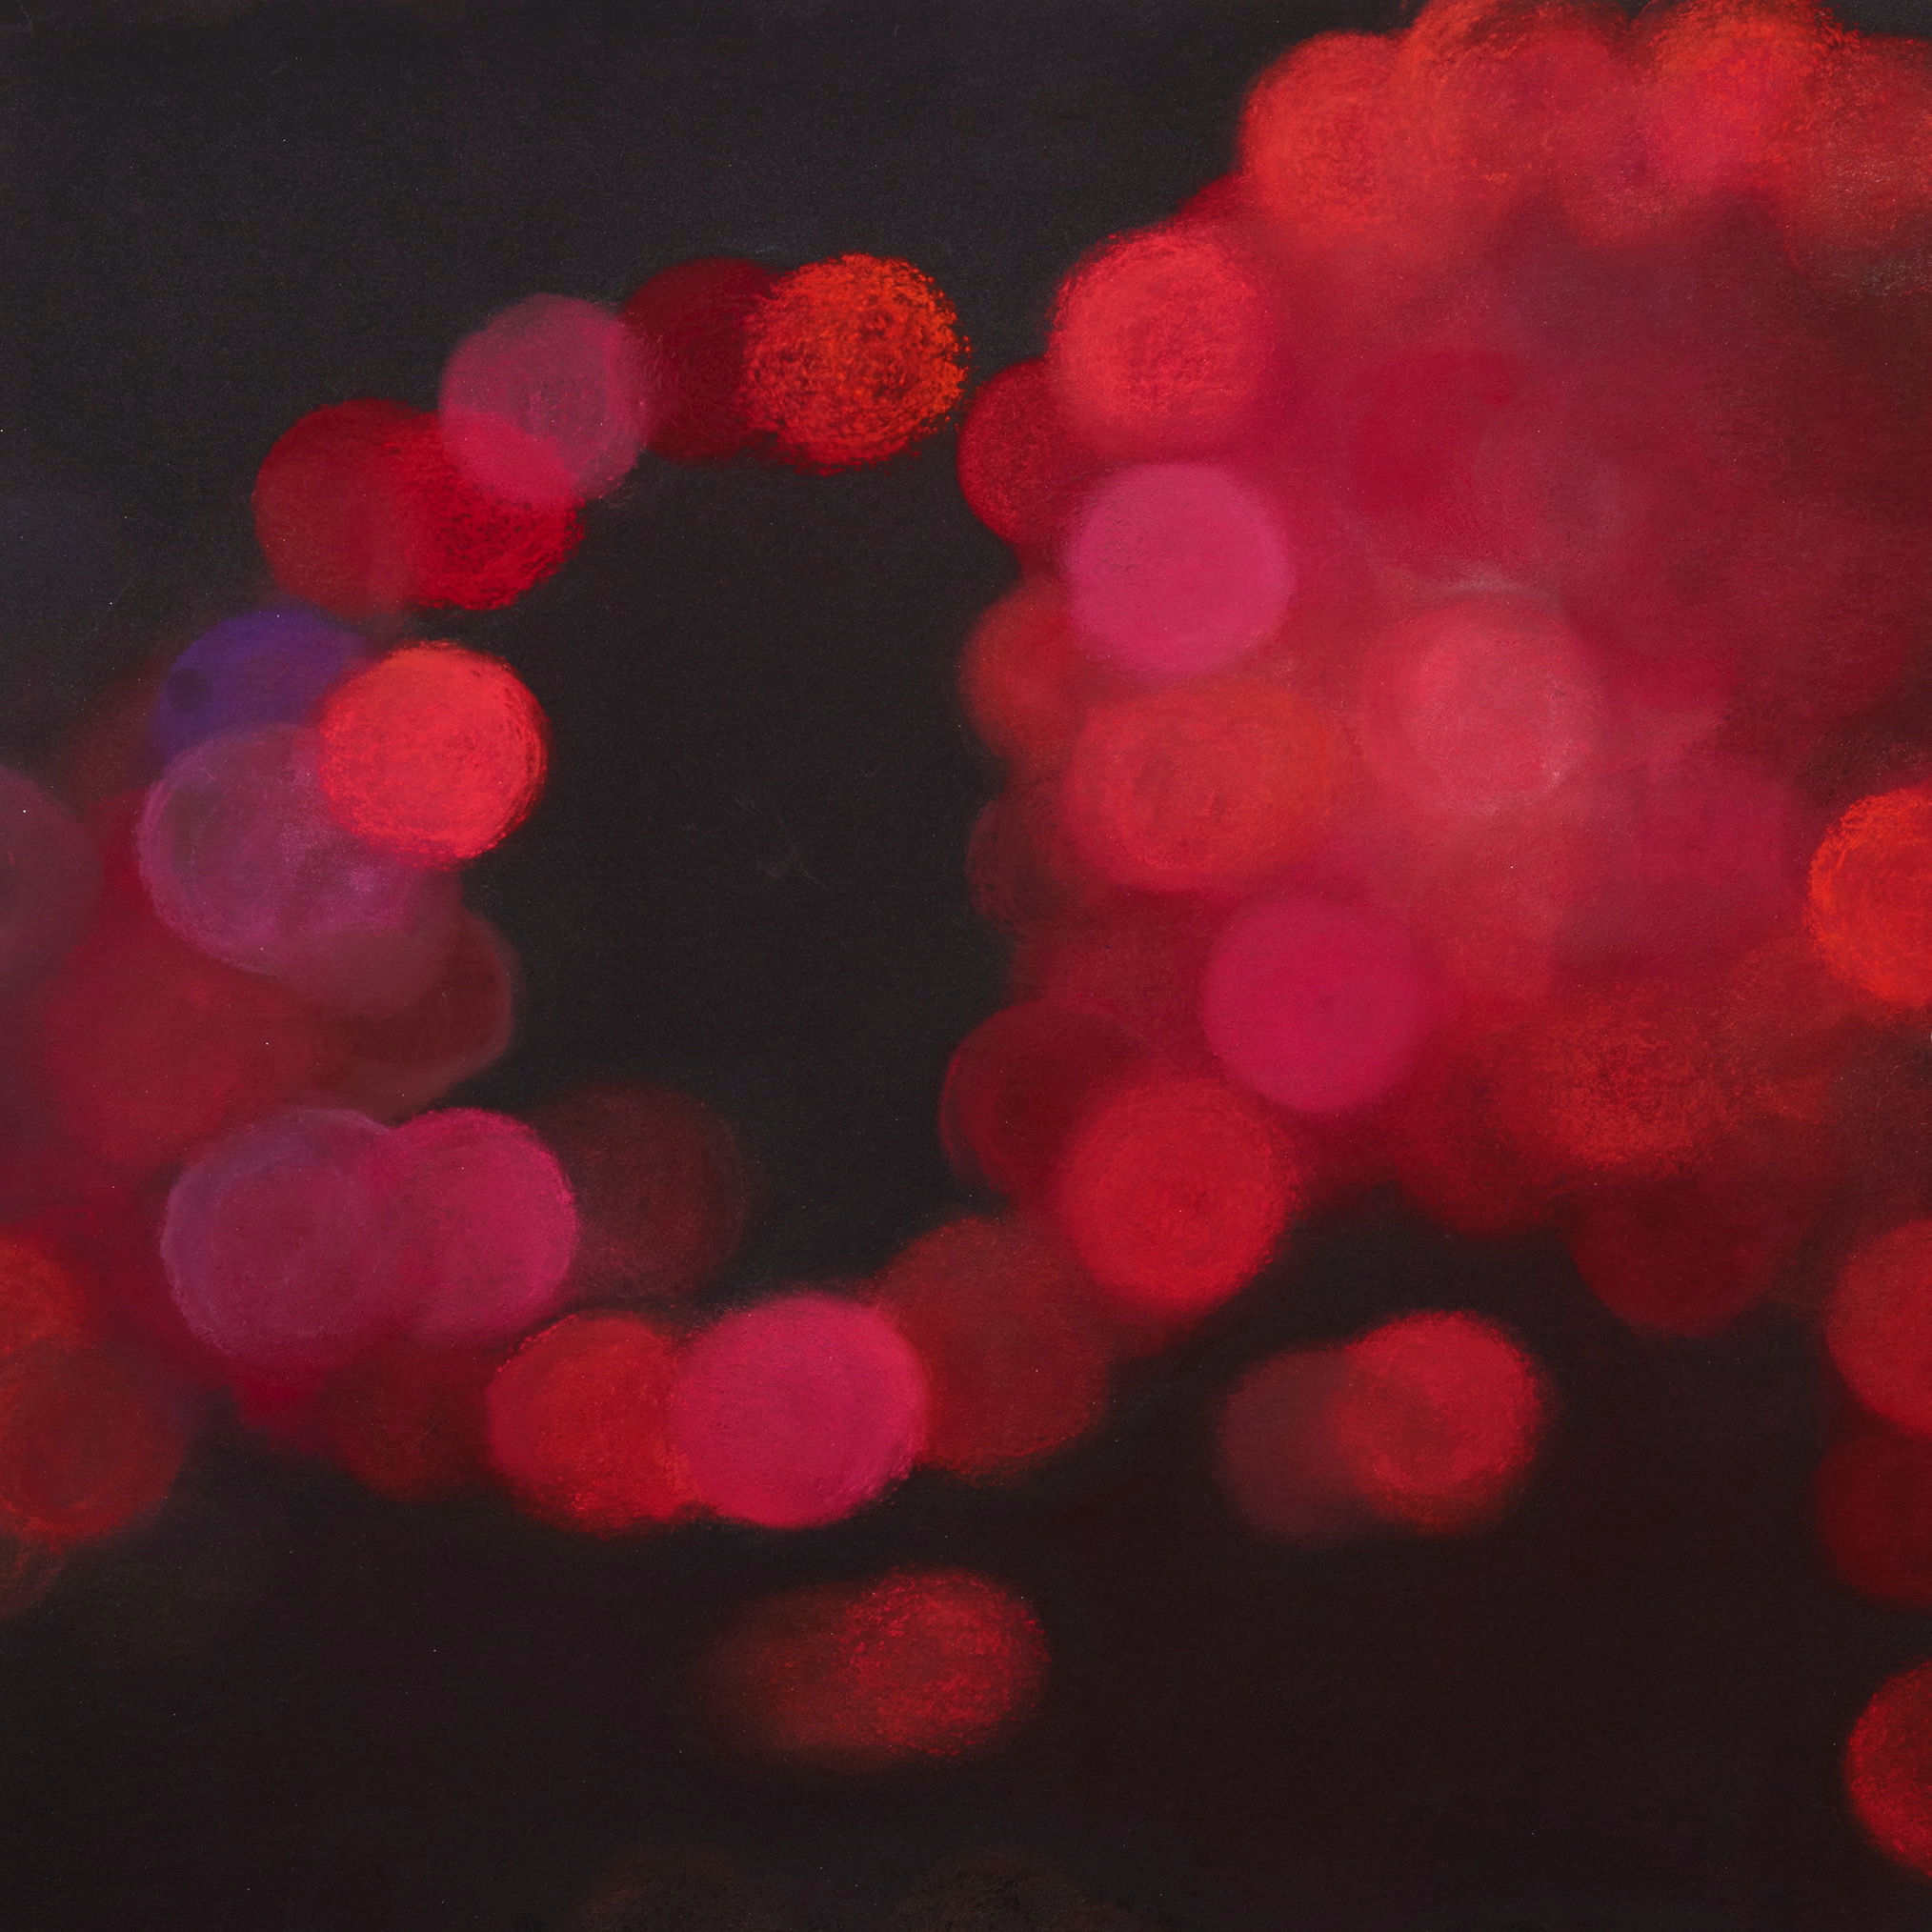  Red halos, 2009, pastel on paper, 40.5x 40.5cm 